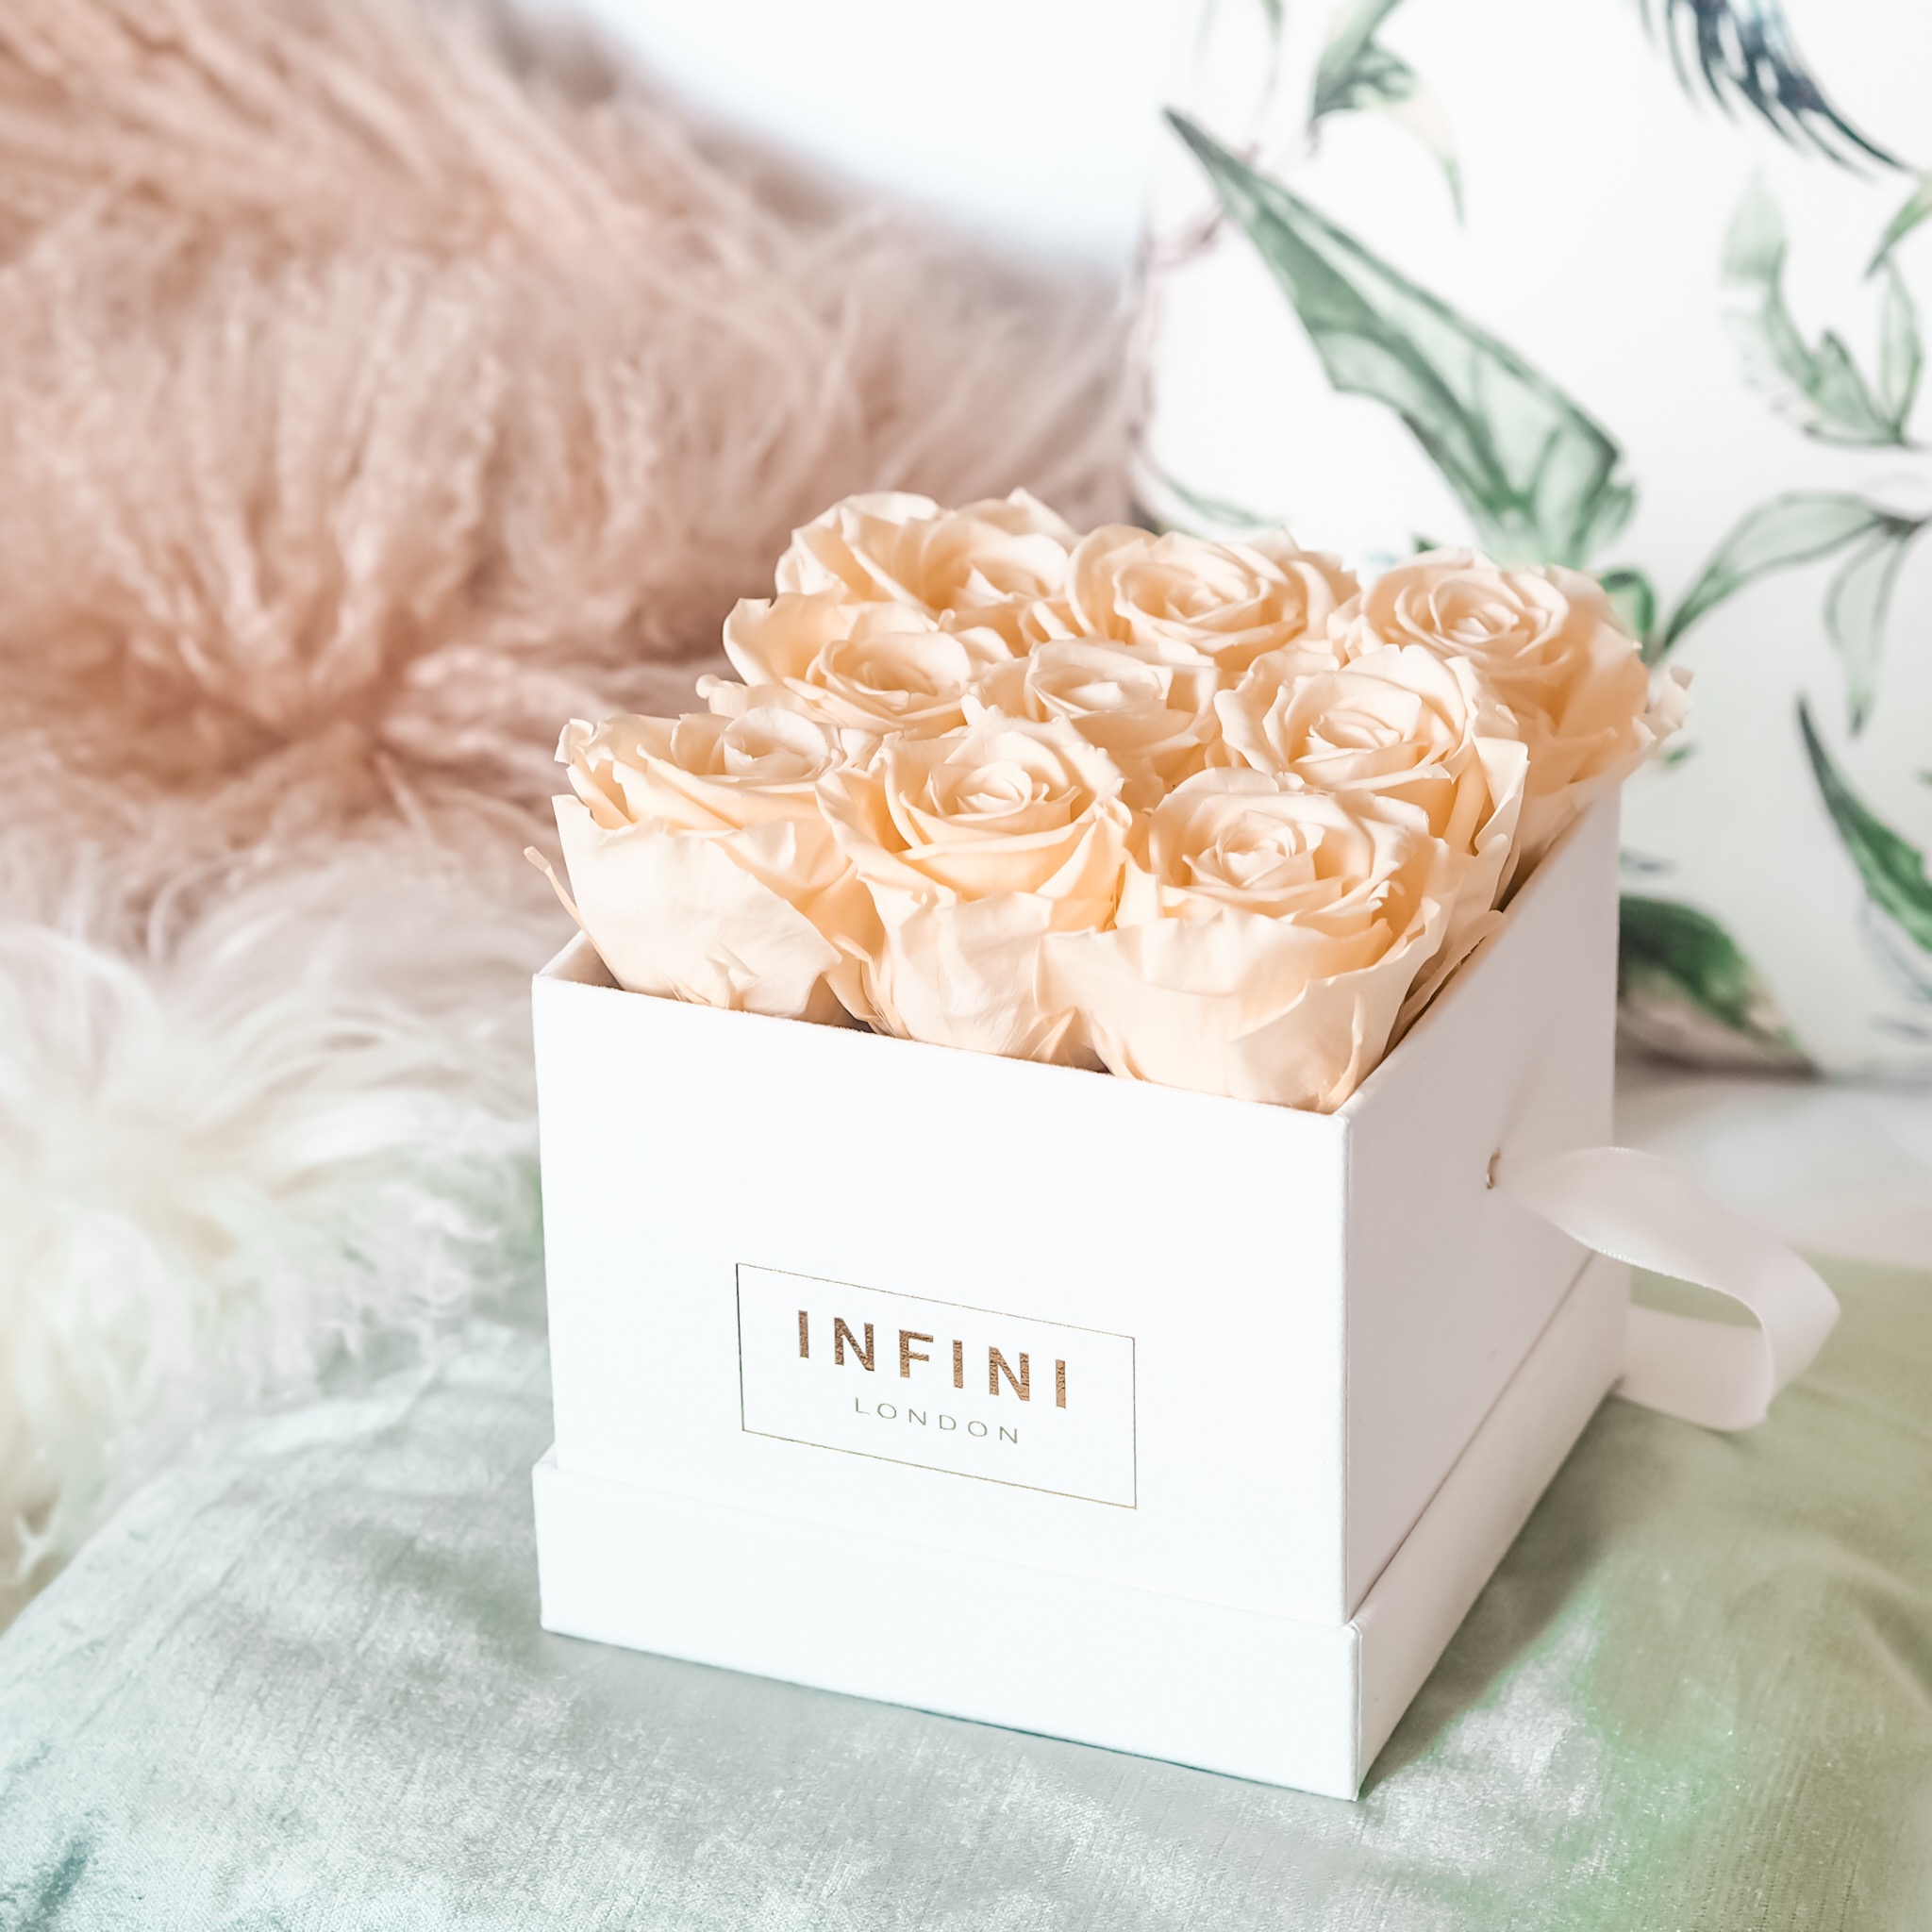 Infini London Roses | roses that last a year | roses that don't need water | roses that last years | flowers that don't need water or feed | roses that last for years